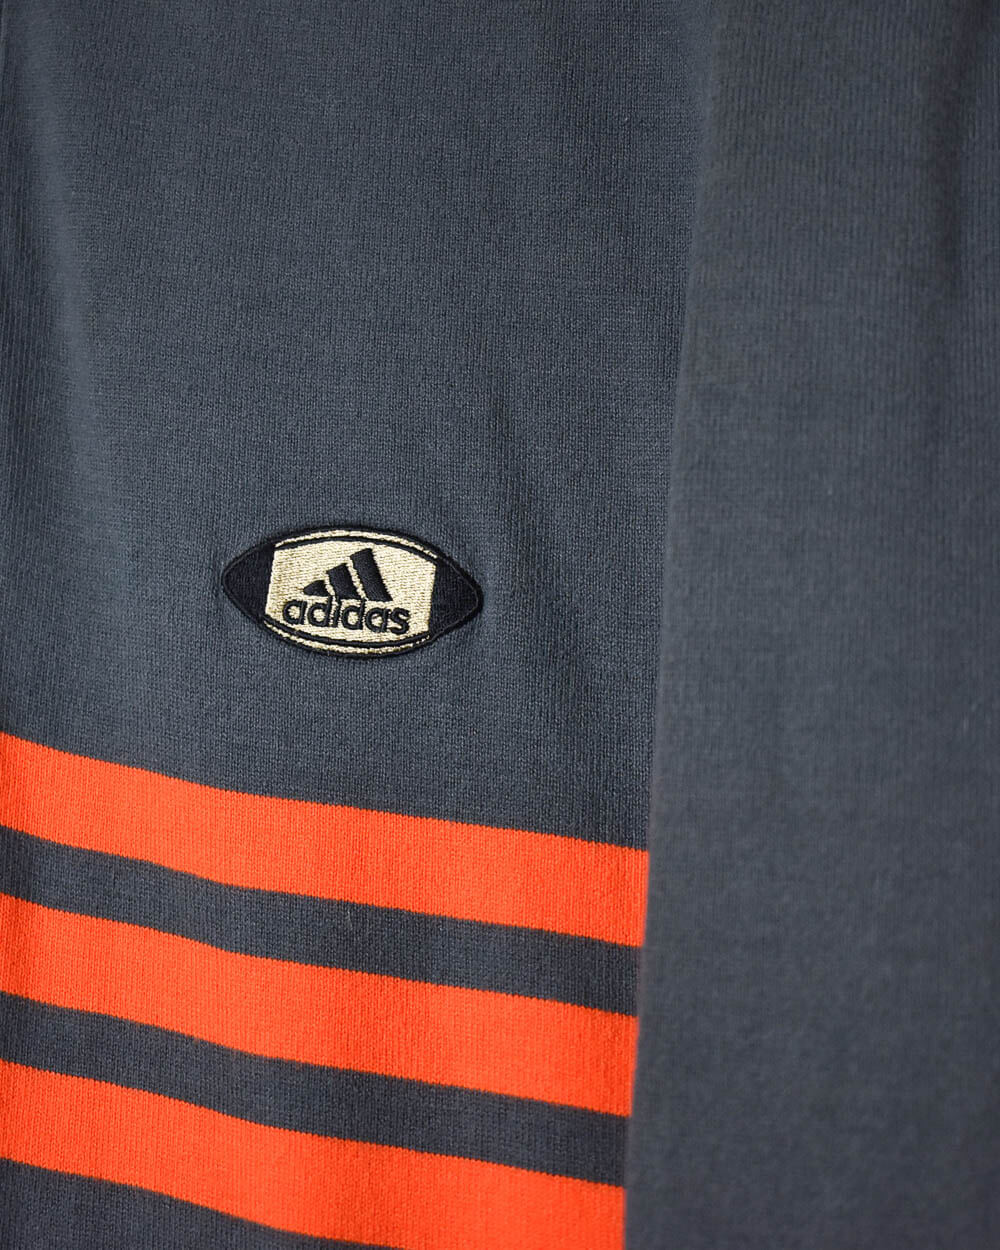 Navy Adidas Rugby Shirt - Large